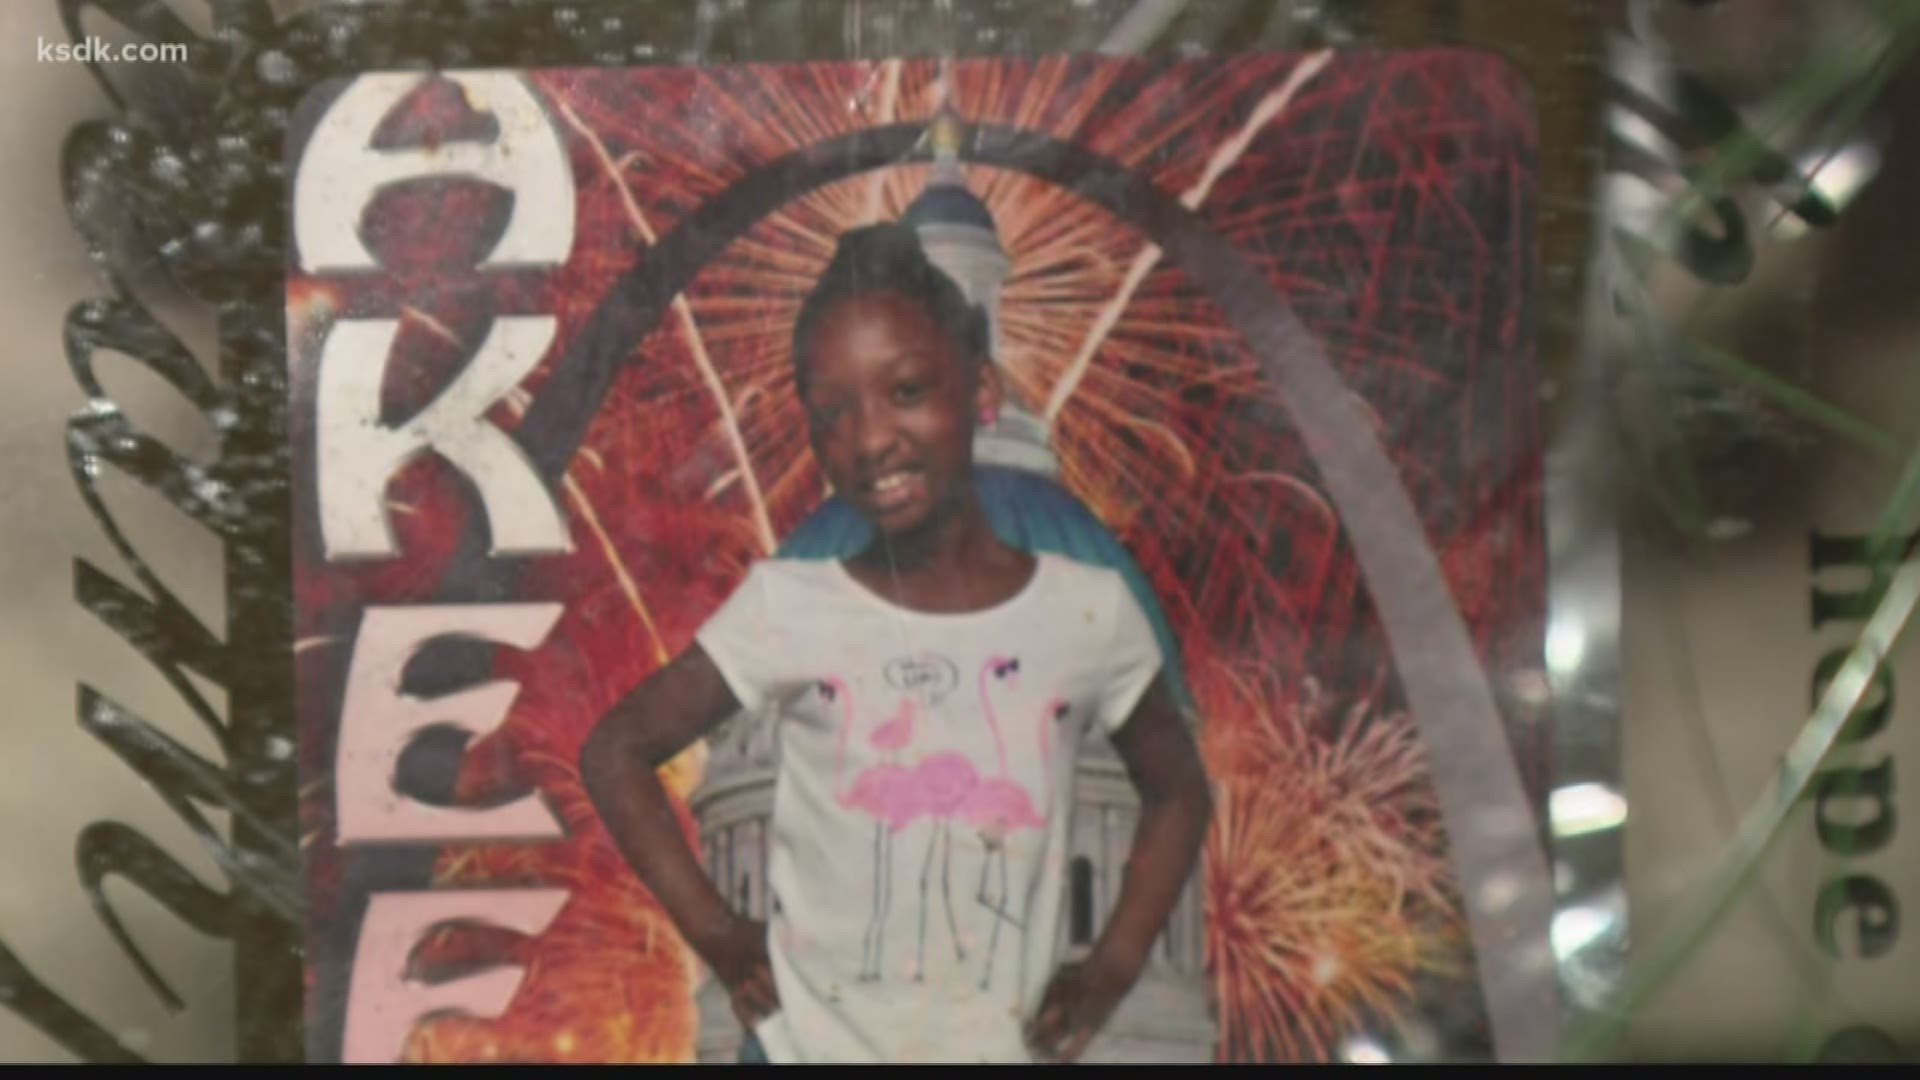 The young girl was hit and killed in October.